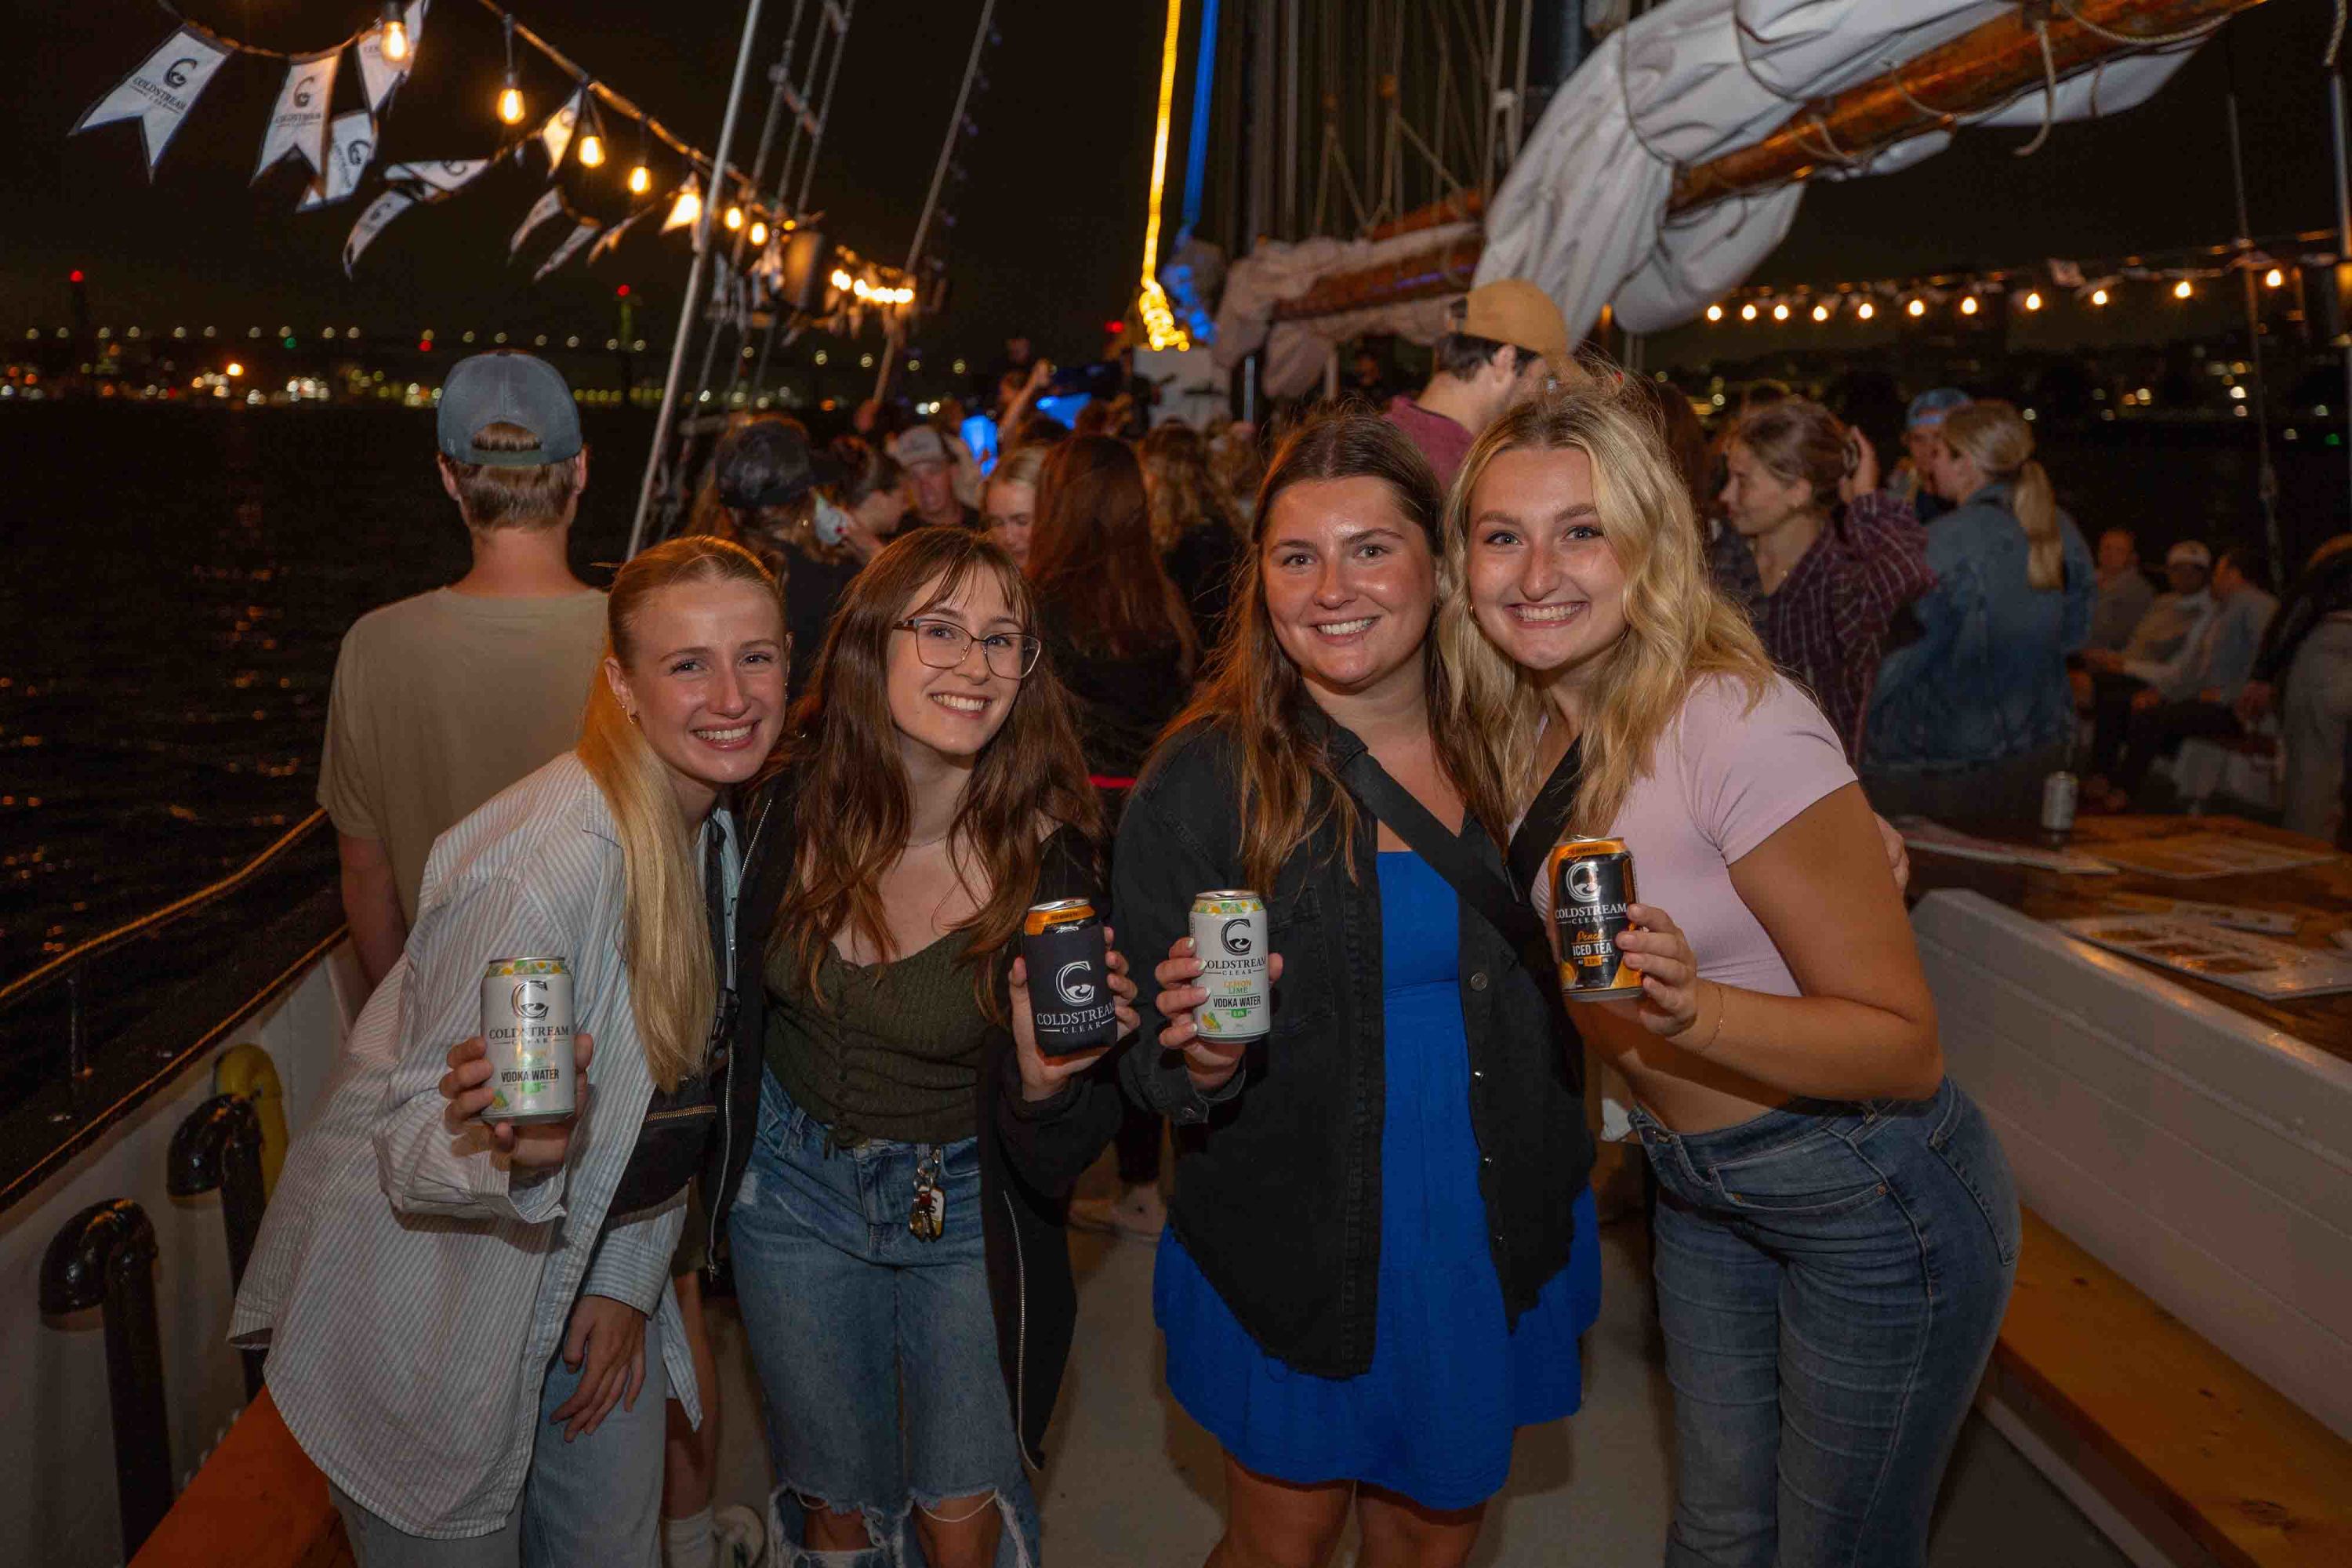 Four friends smile as they raise their cans of Coldstream beverages on the Coldstream Party Boat